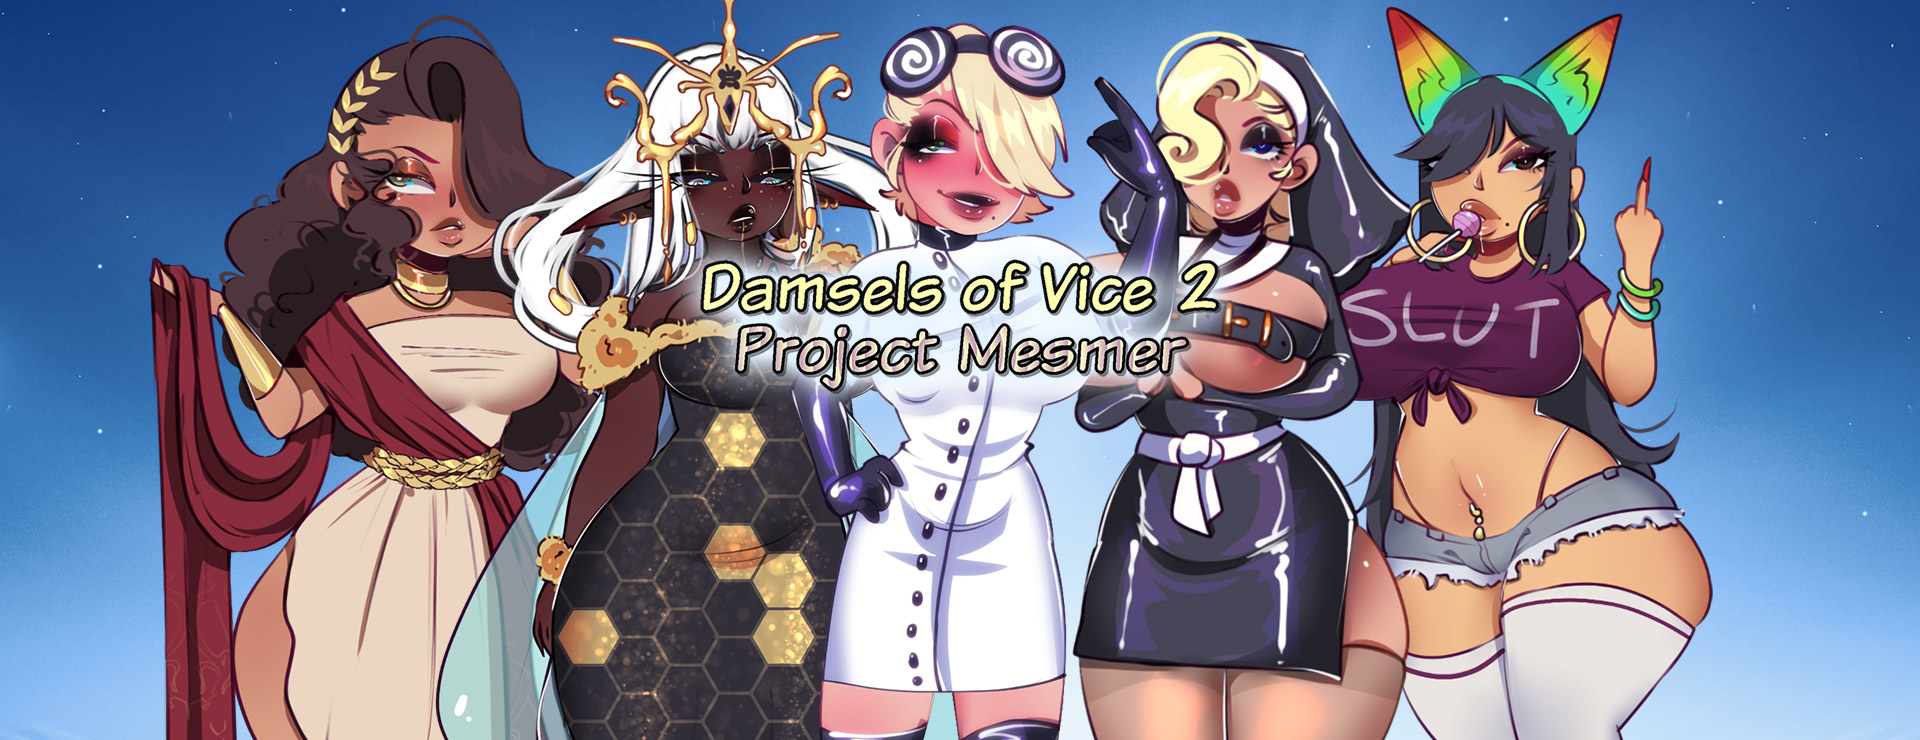 Damsels of Vice 2: Project Mesmer - RPG Jeu